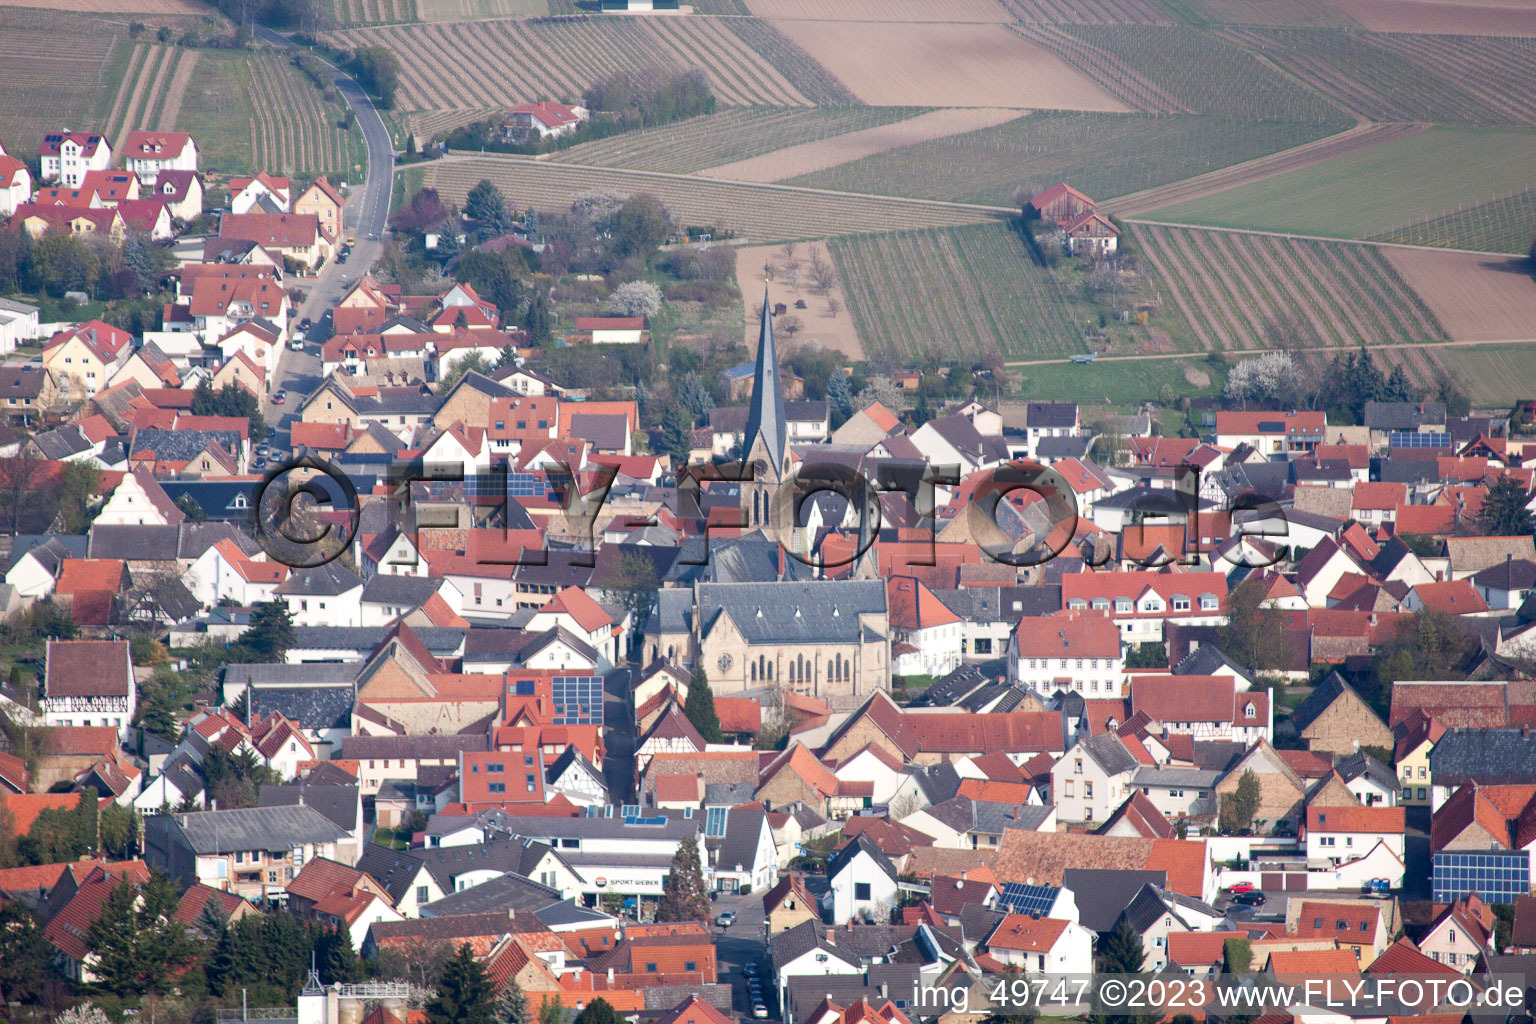 Saulheim in the state Rhineland-Palatinate, Germany seen from above